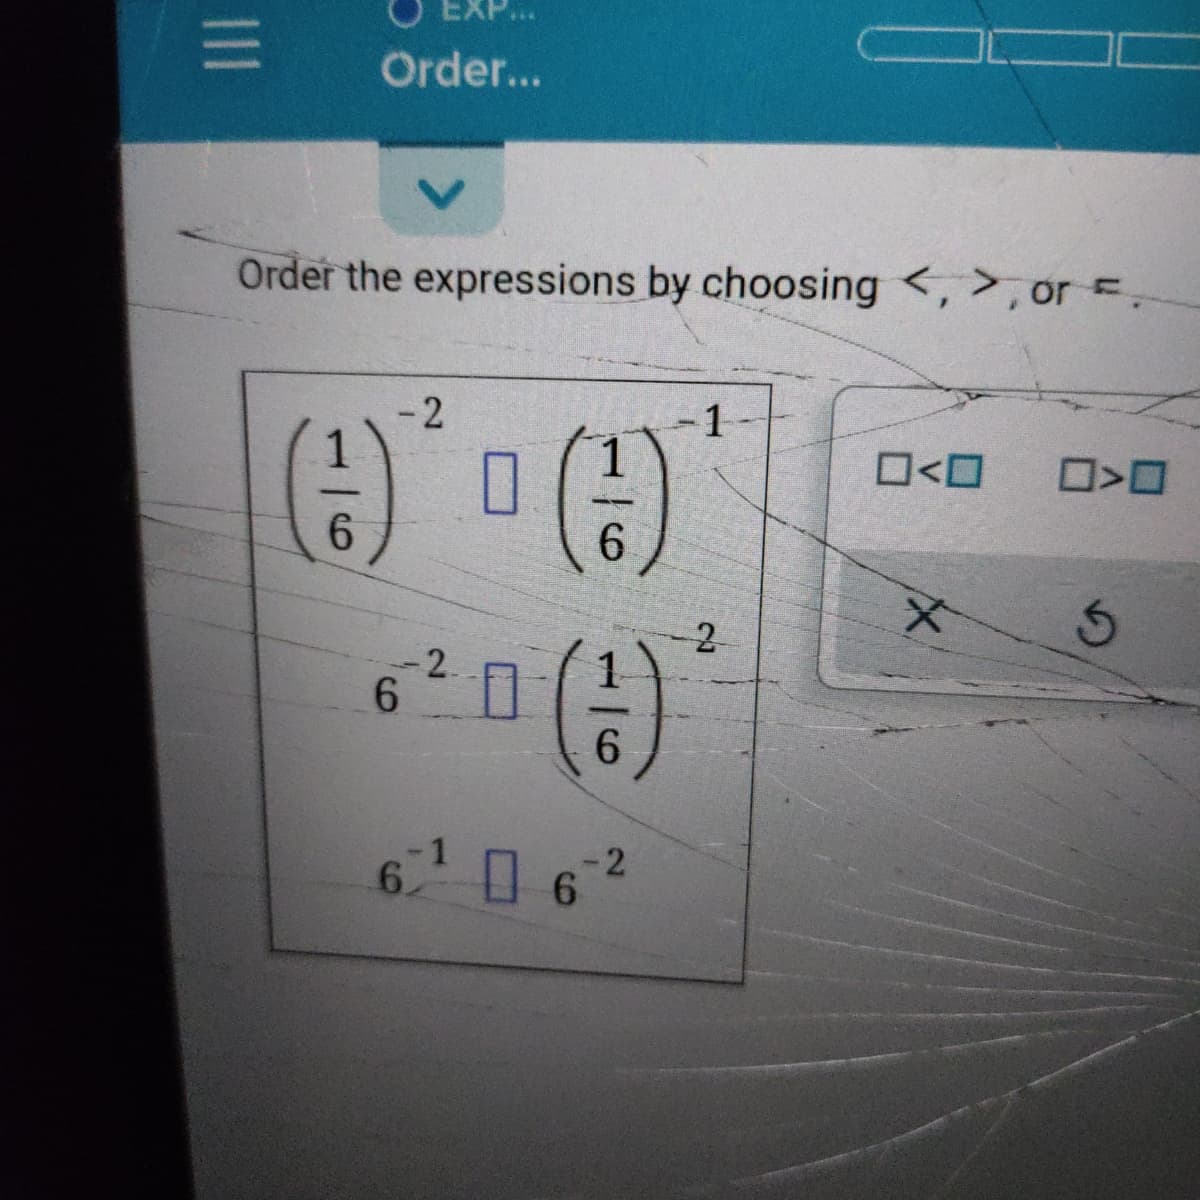 EXP...
Order...
Order the expressions by choosing <, >, or =.
-2
O<O
6.
2
-2.
6.
6.
-1
-2
6 6
